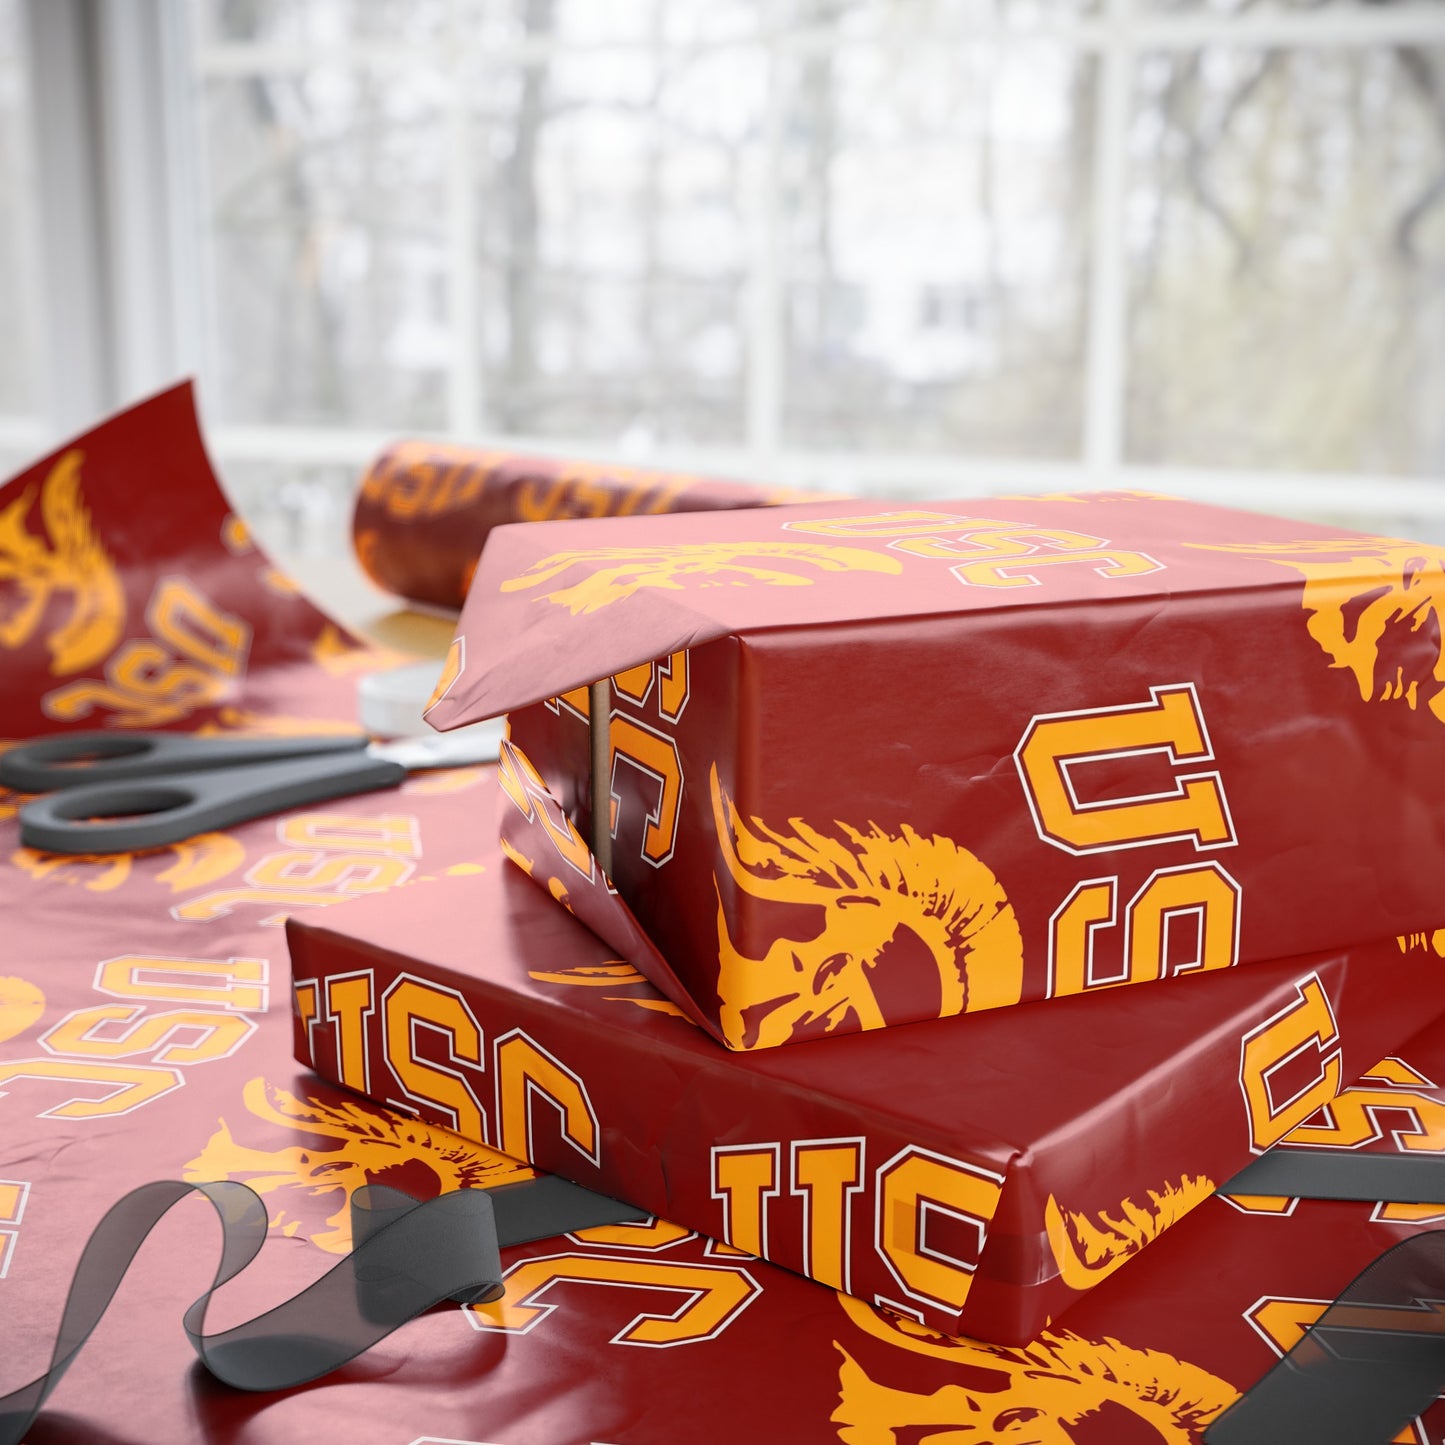 USC Southern California NCAA College Graduation Alumni Birthday Gift Wrapping Paper Holiday